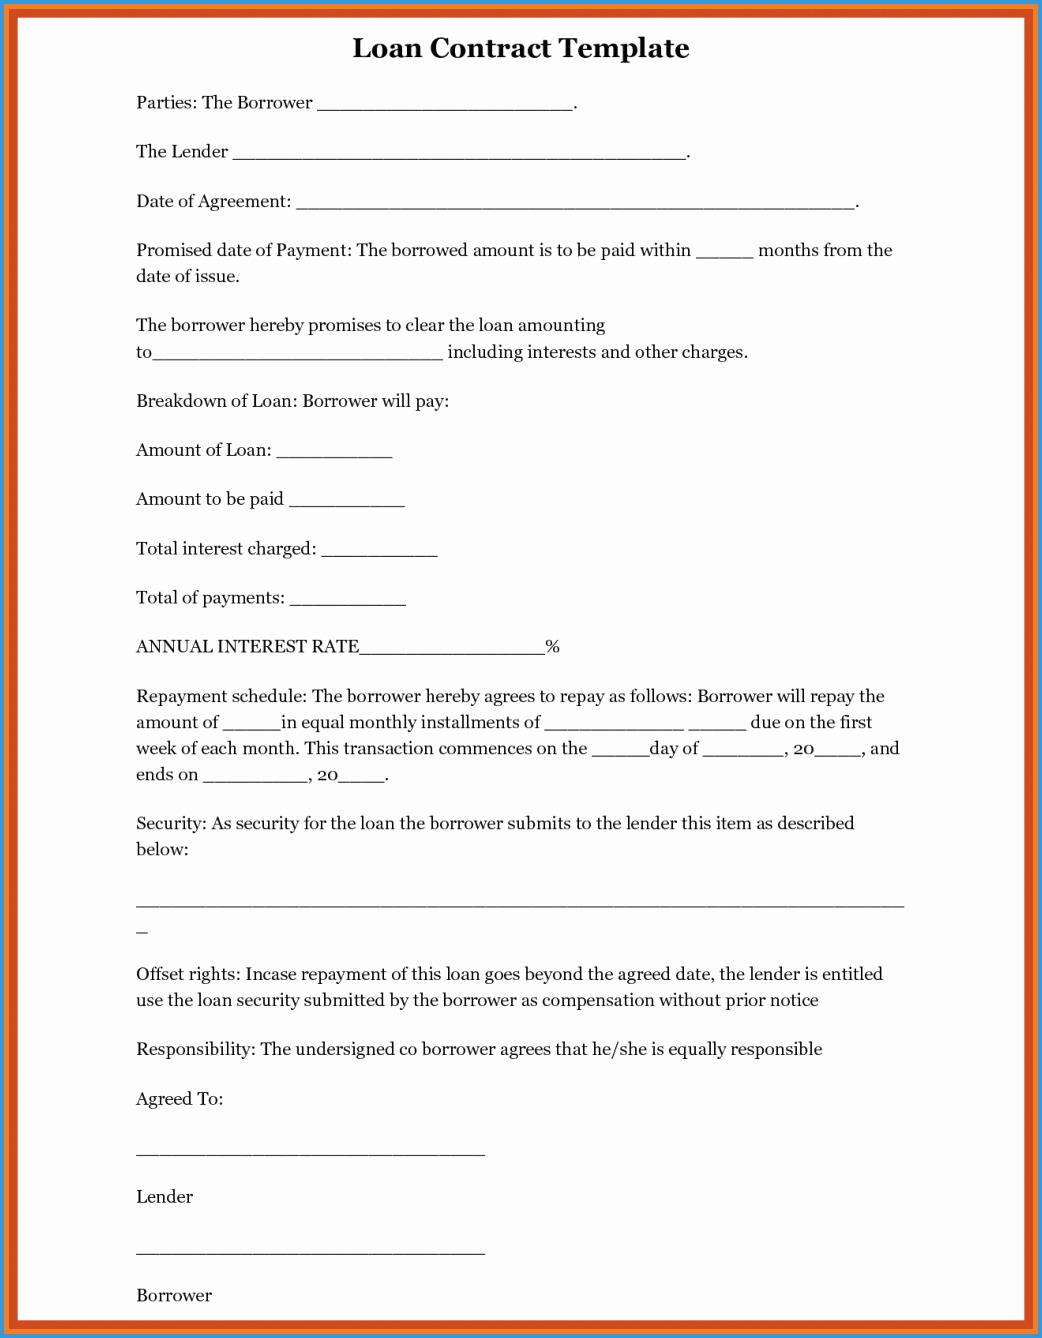 Personal Loan Agreement Template Free Template For Loan Agreement Between Friends New 9 10 Sample